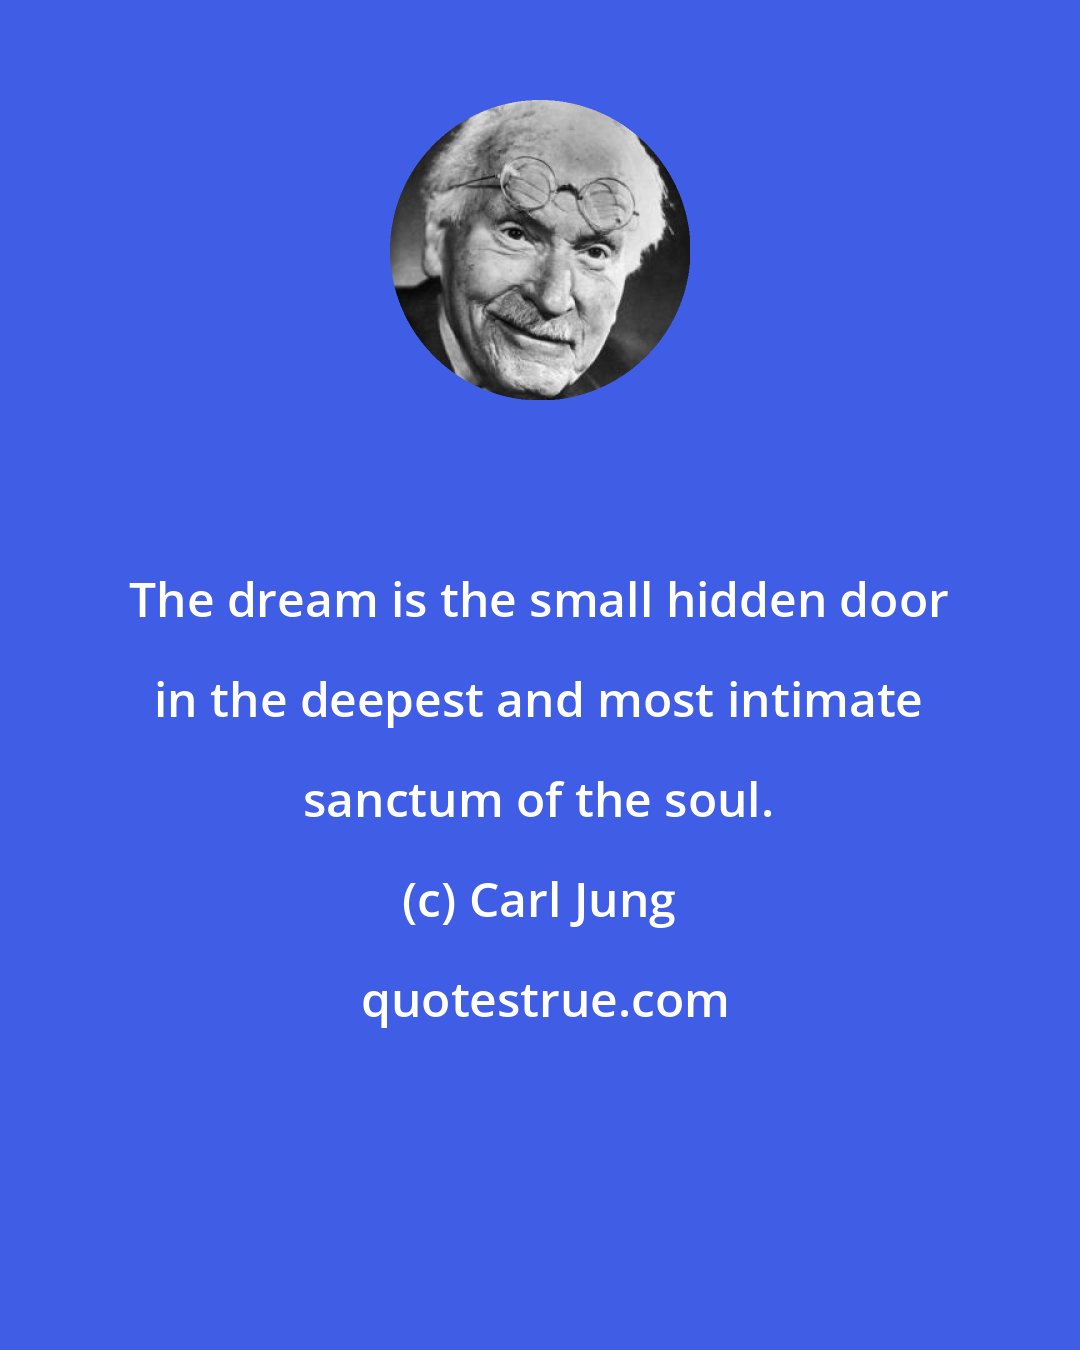 Carl Jung: The dream is the small hidden door in the deepest and most intimate sanctum of the soul.